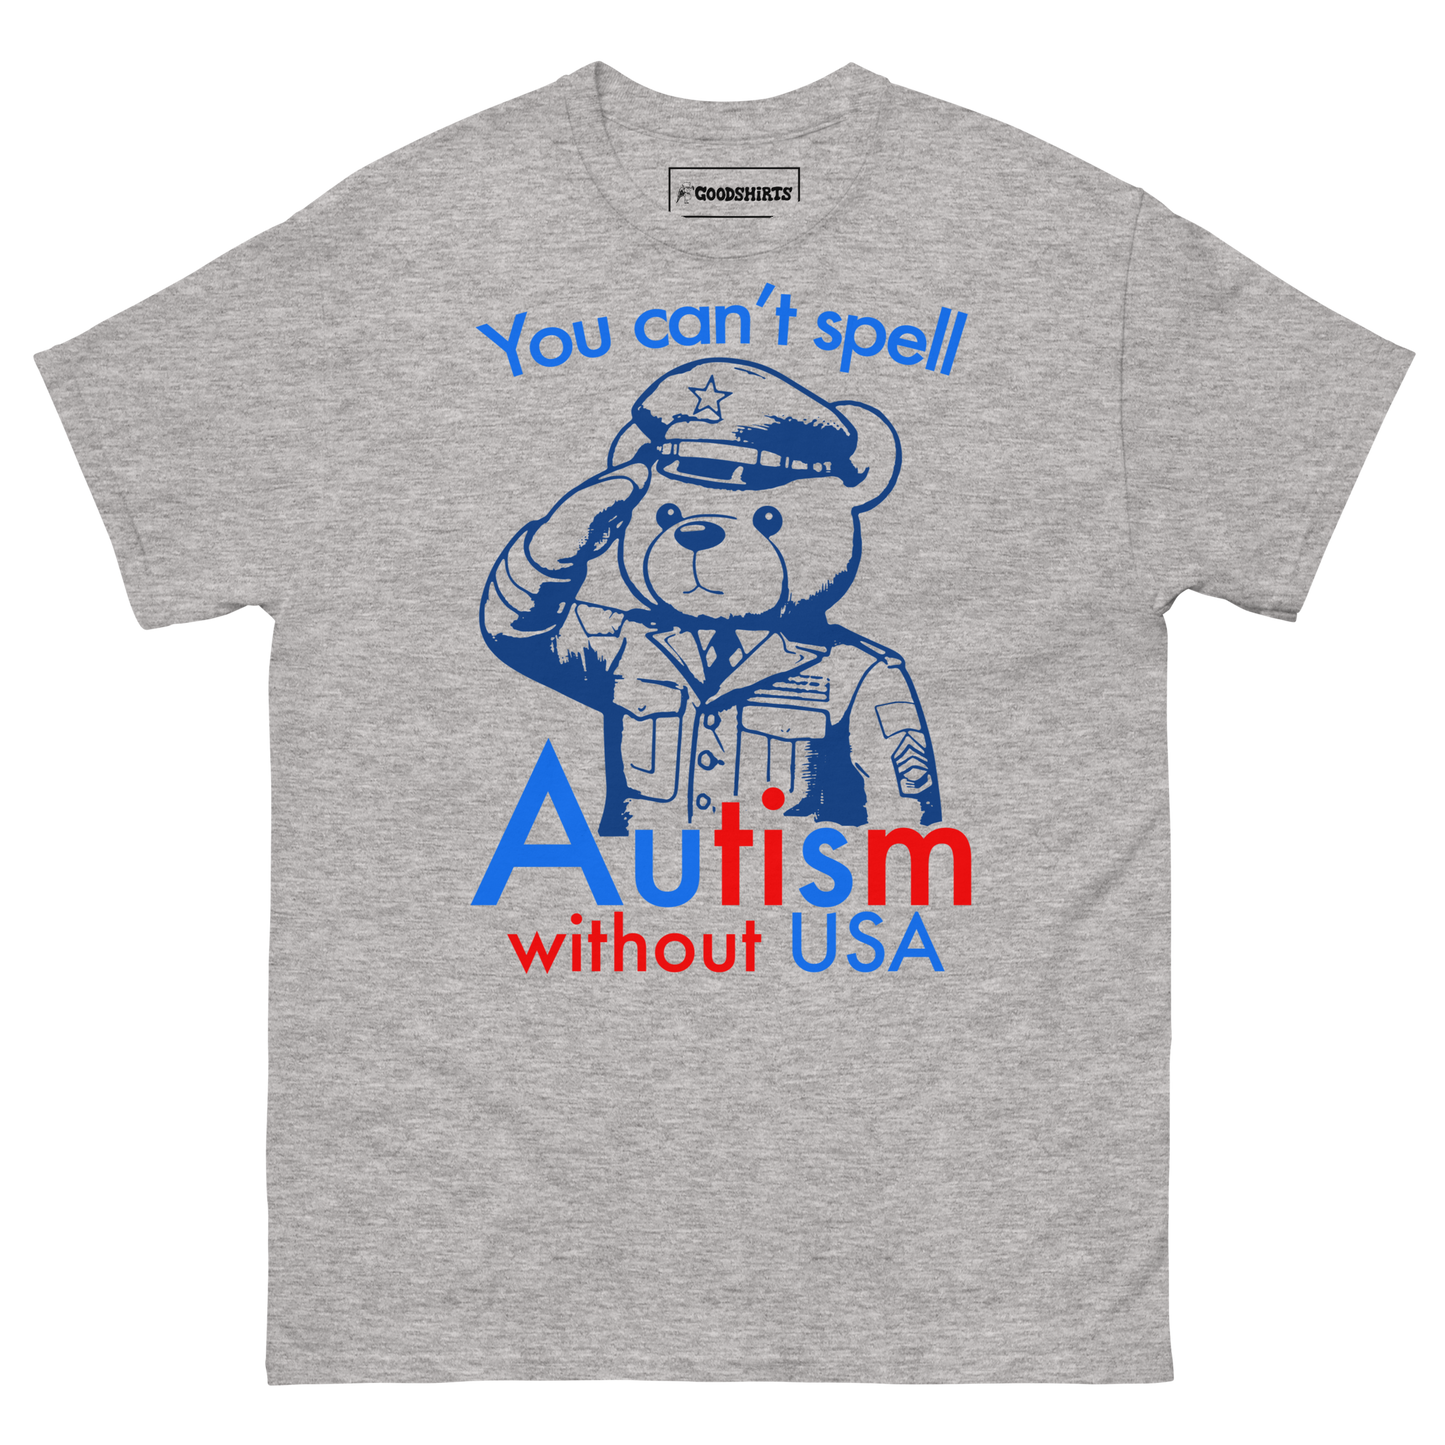 You Can't Spell Autism Without USA.